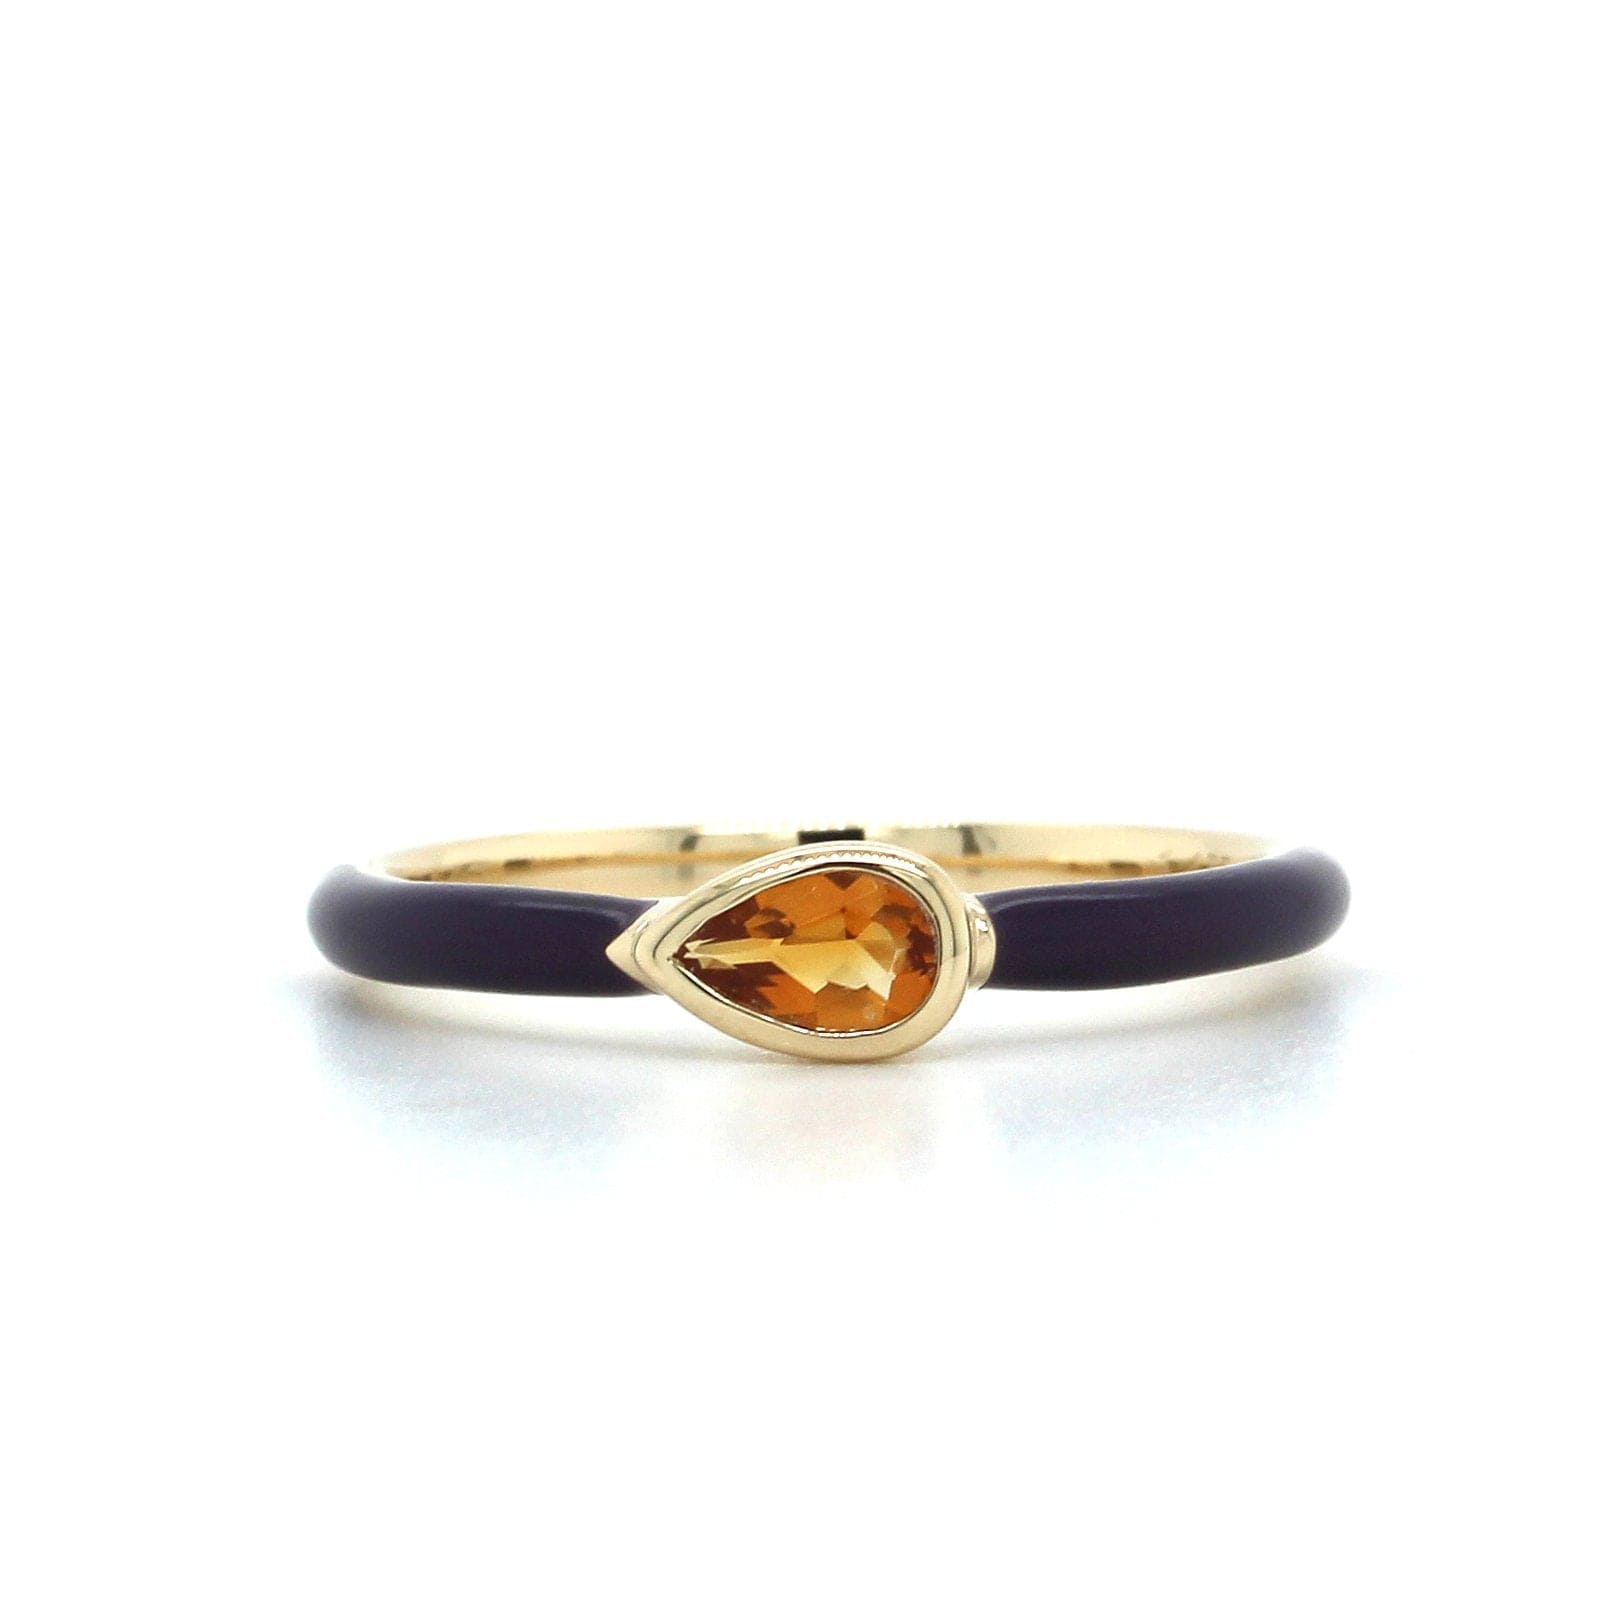 The Frankie 14K Yellow Gold Citrine with Plum Enamel Ring, 14K Yellow Gold, Long's Jewelers